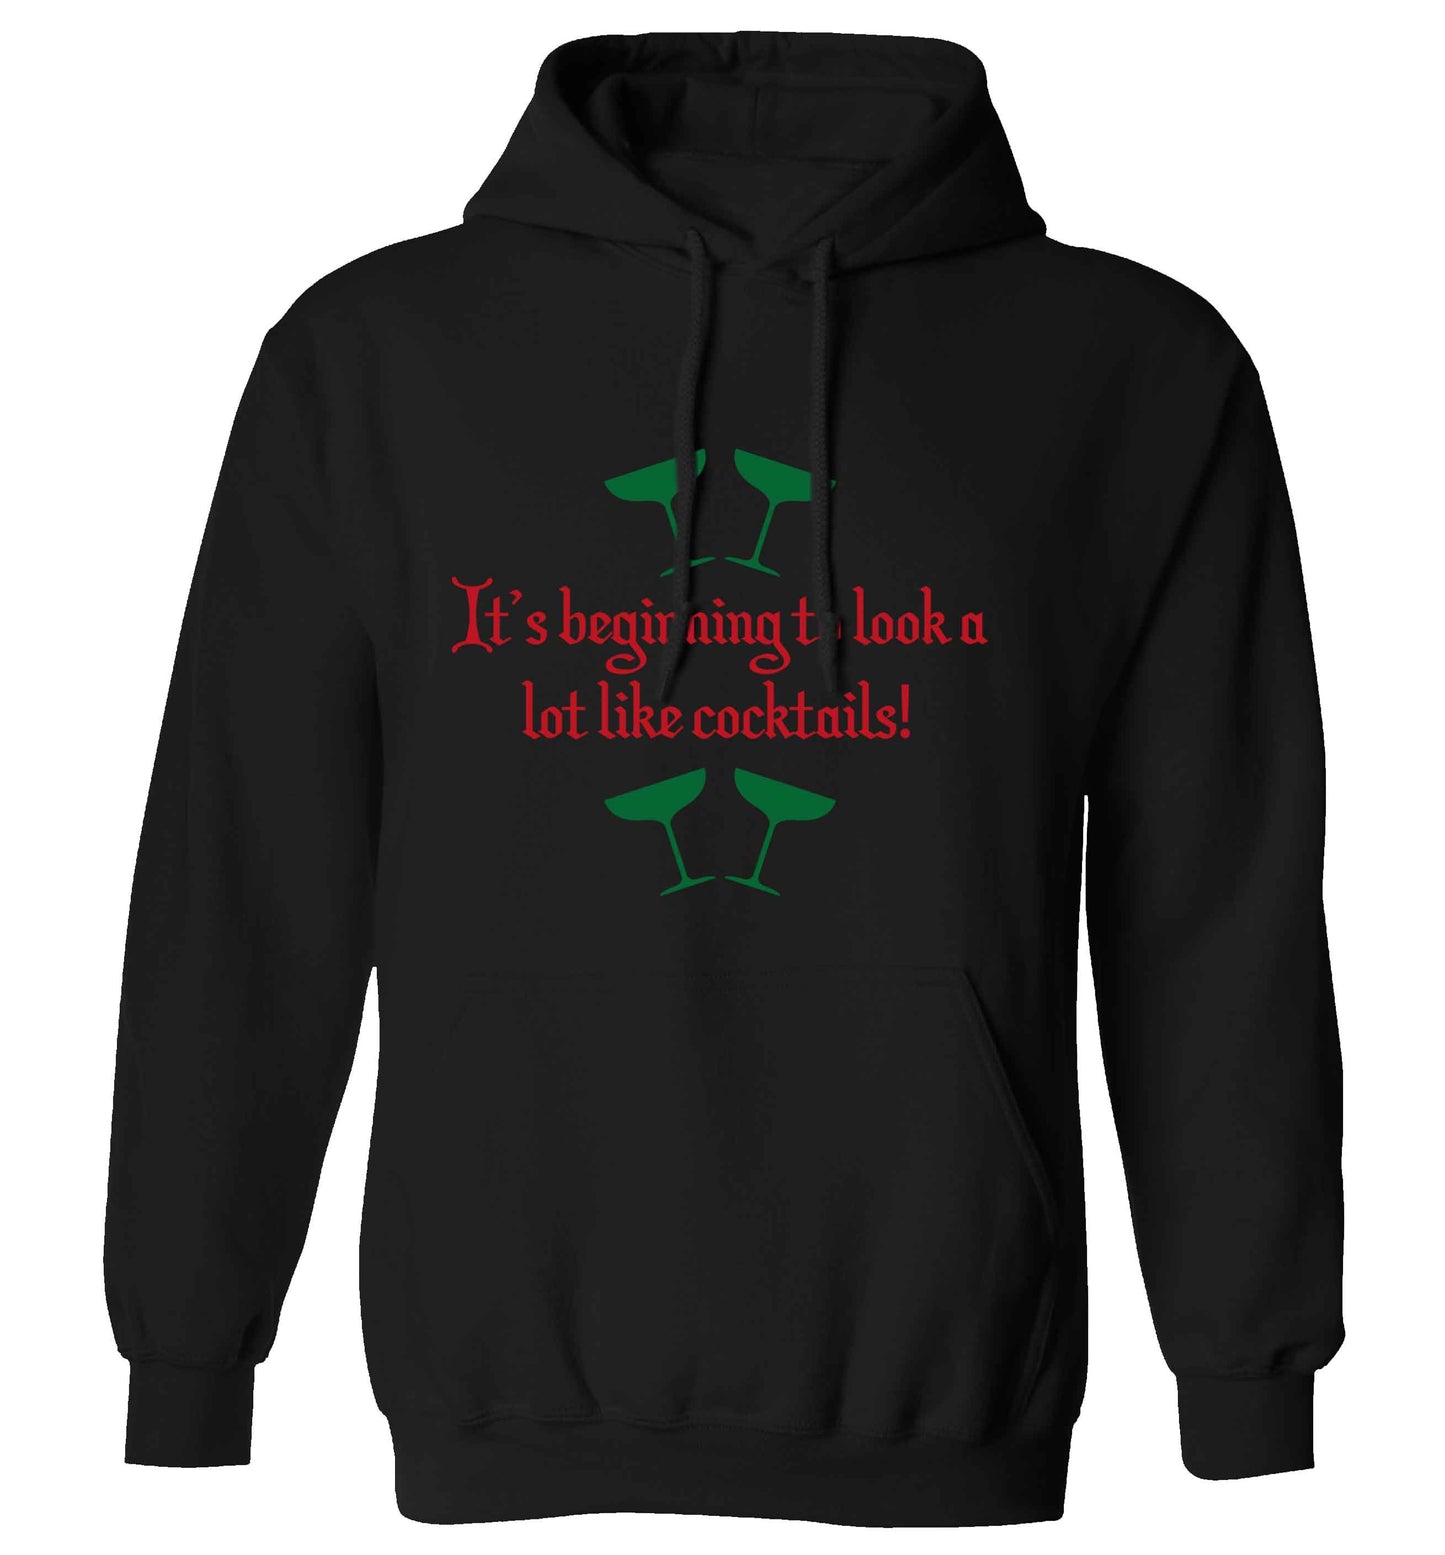 It's beginning to look a lot like cocktails adults unisex black hoodie 2XL